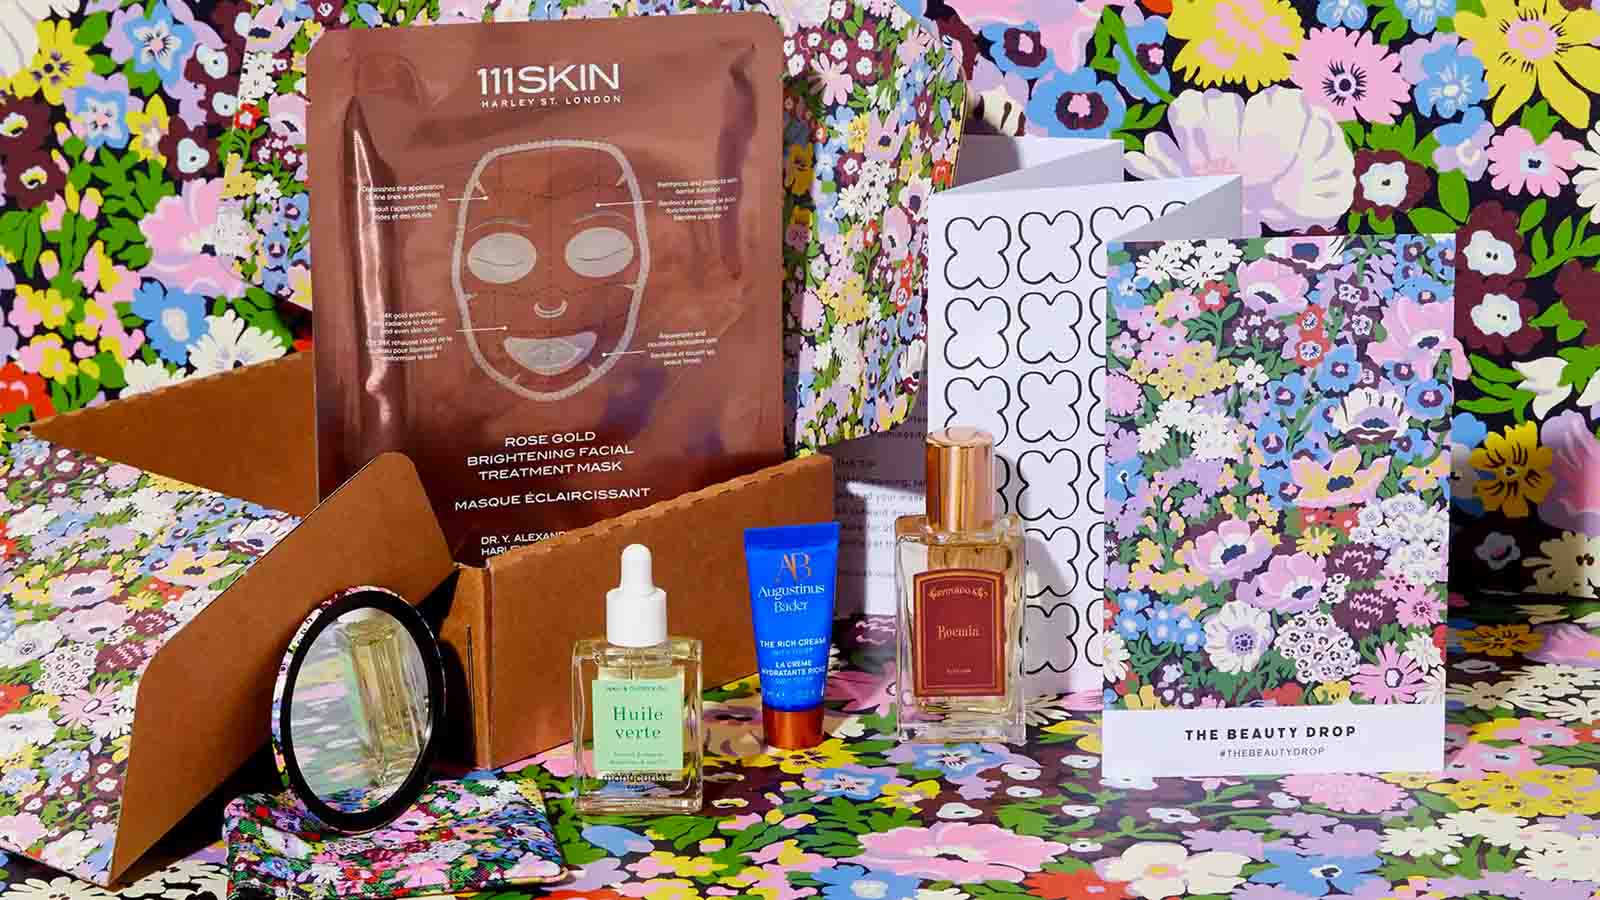 Liberty - The Beauty Drop October discovery box